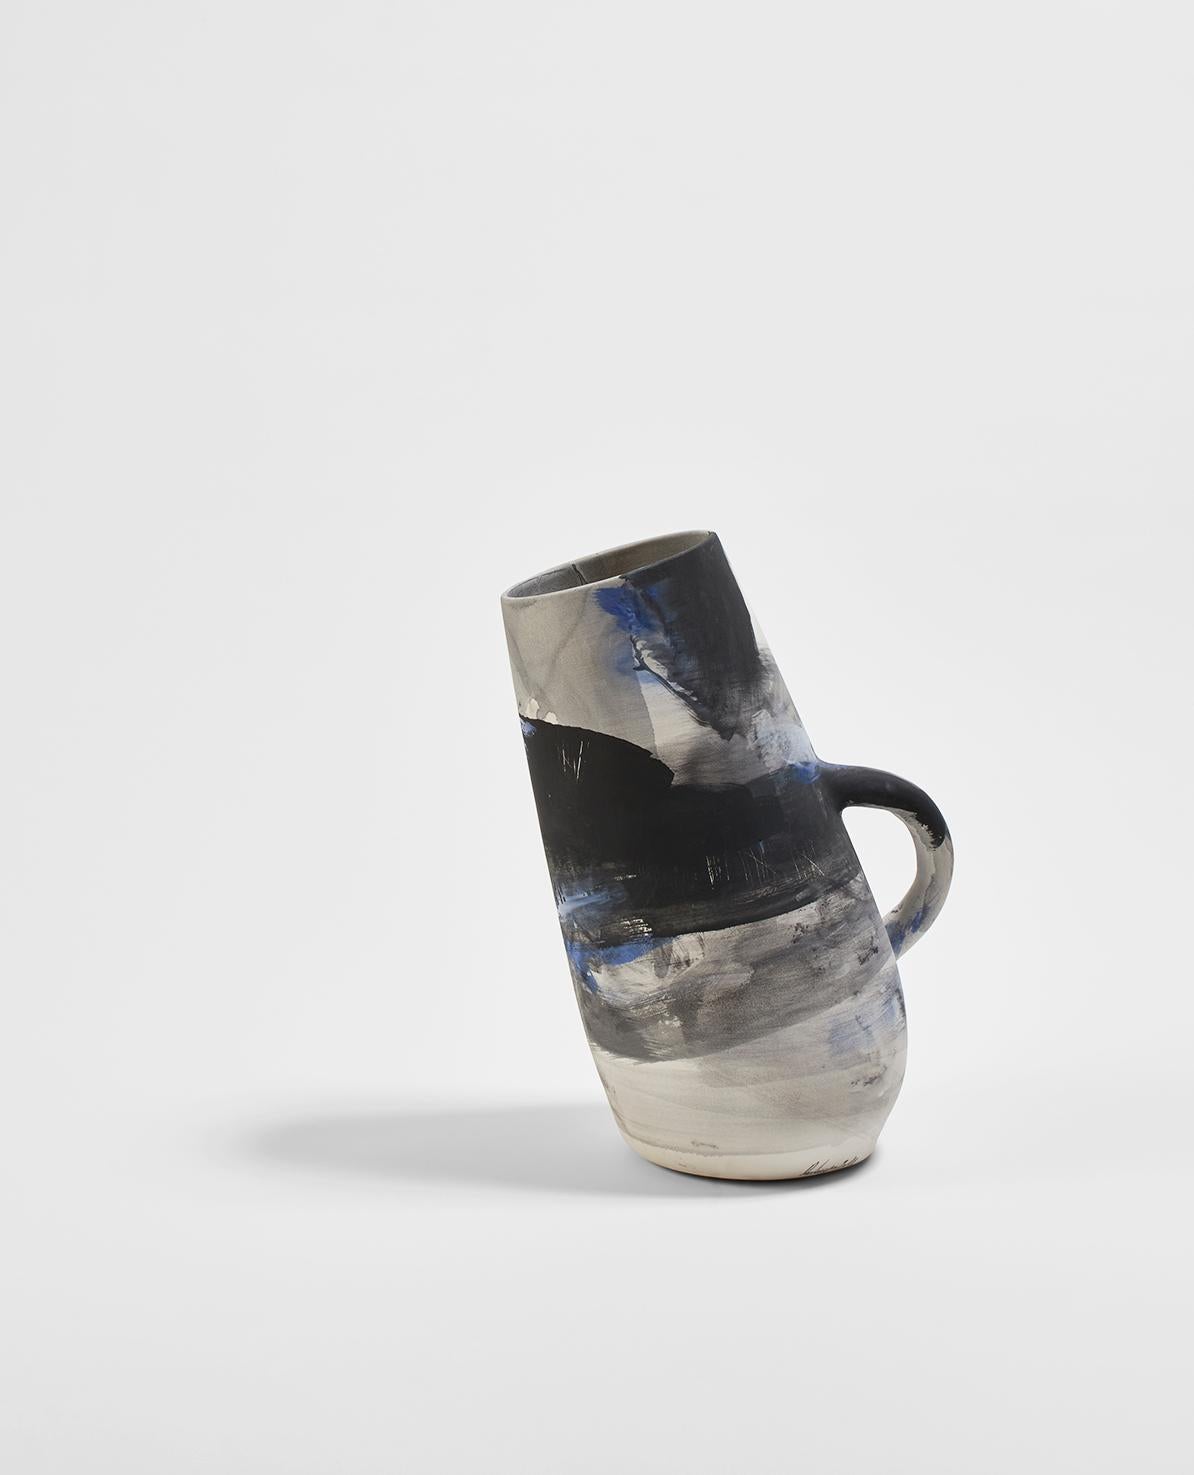 Orage ceramics are one off pieces, designed by the French artist Benjamin Poulanges who is represented by Galerie Negropontes. 

Multi-faceted artist Benjamin Poulanges offers a distinctive vision. His experience is far-ranging, his mind open to